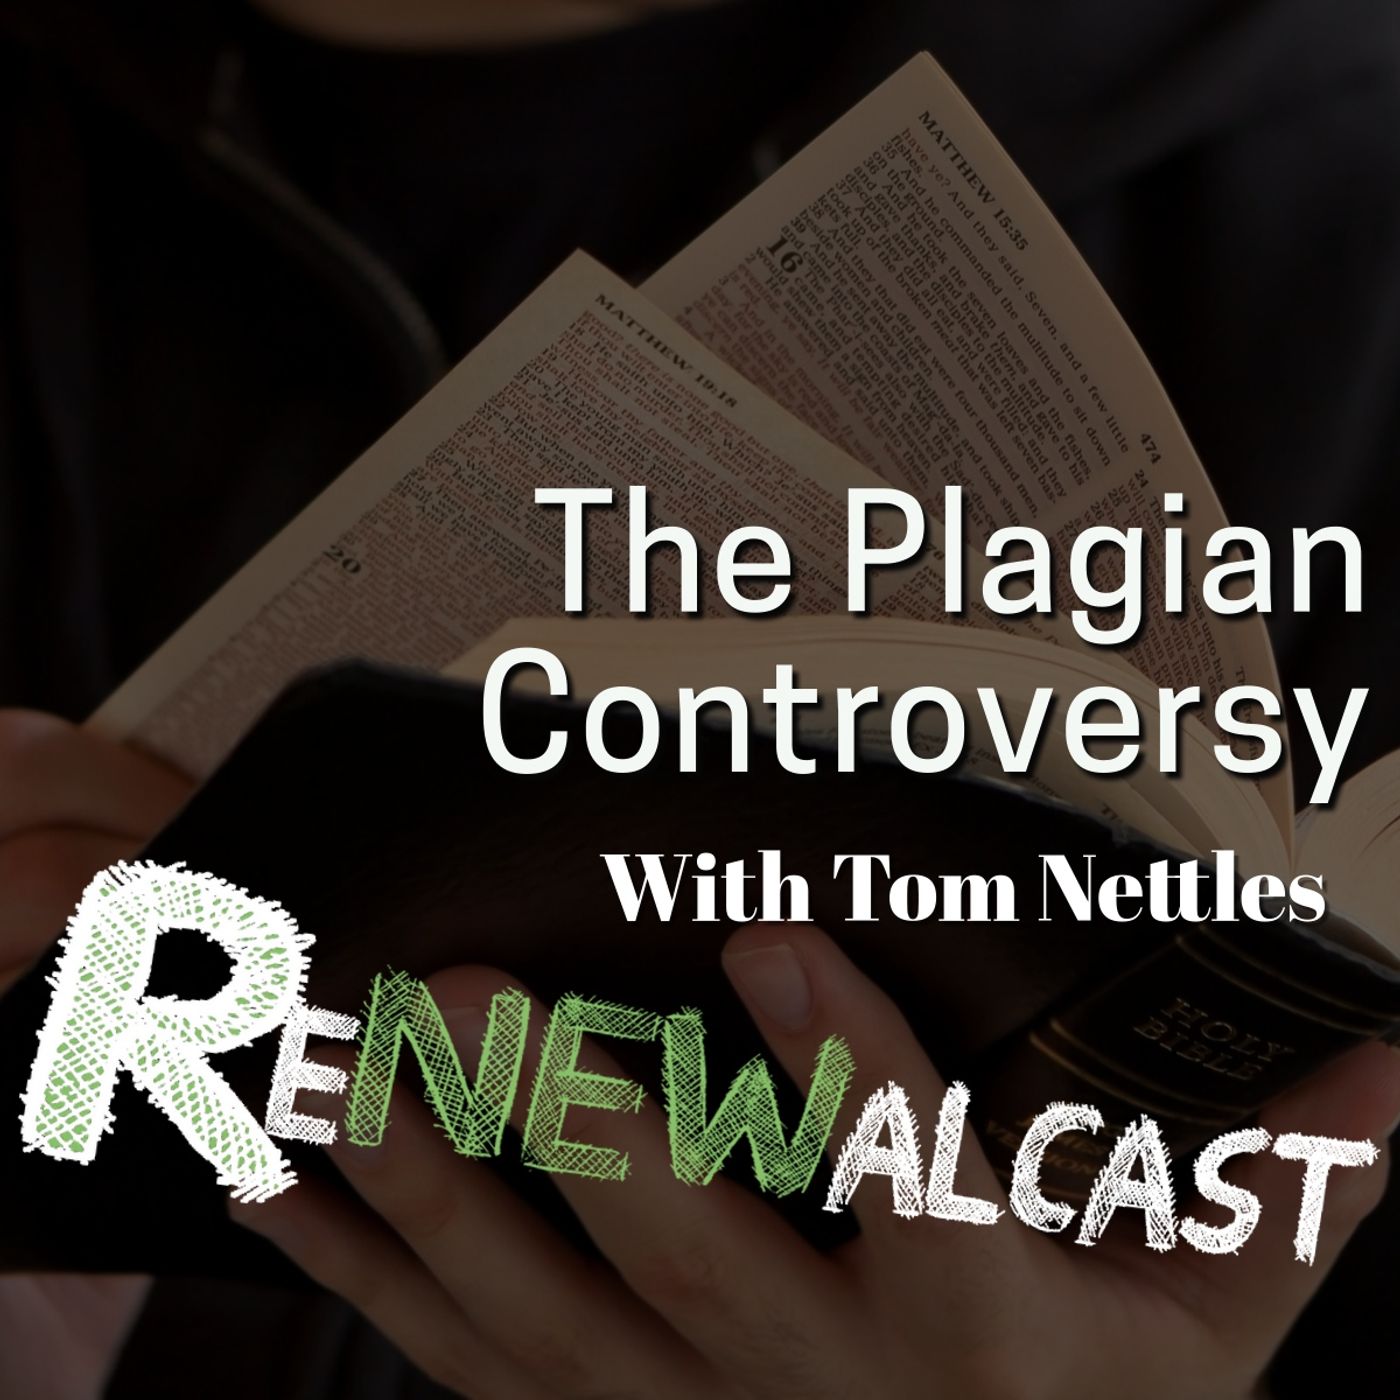 The Plagian Controversy with Tom Nettles